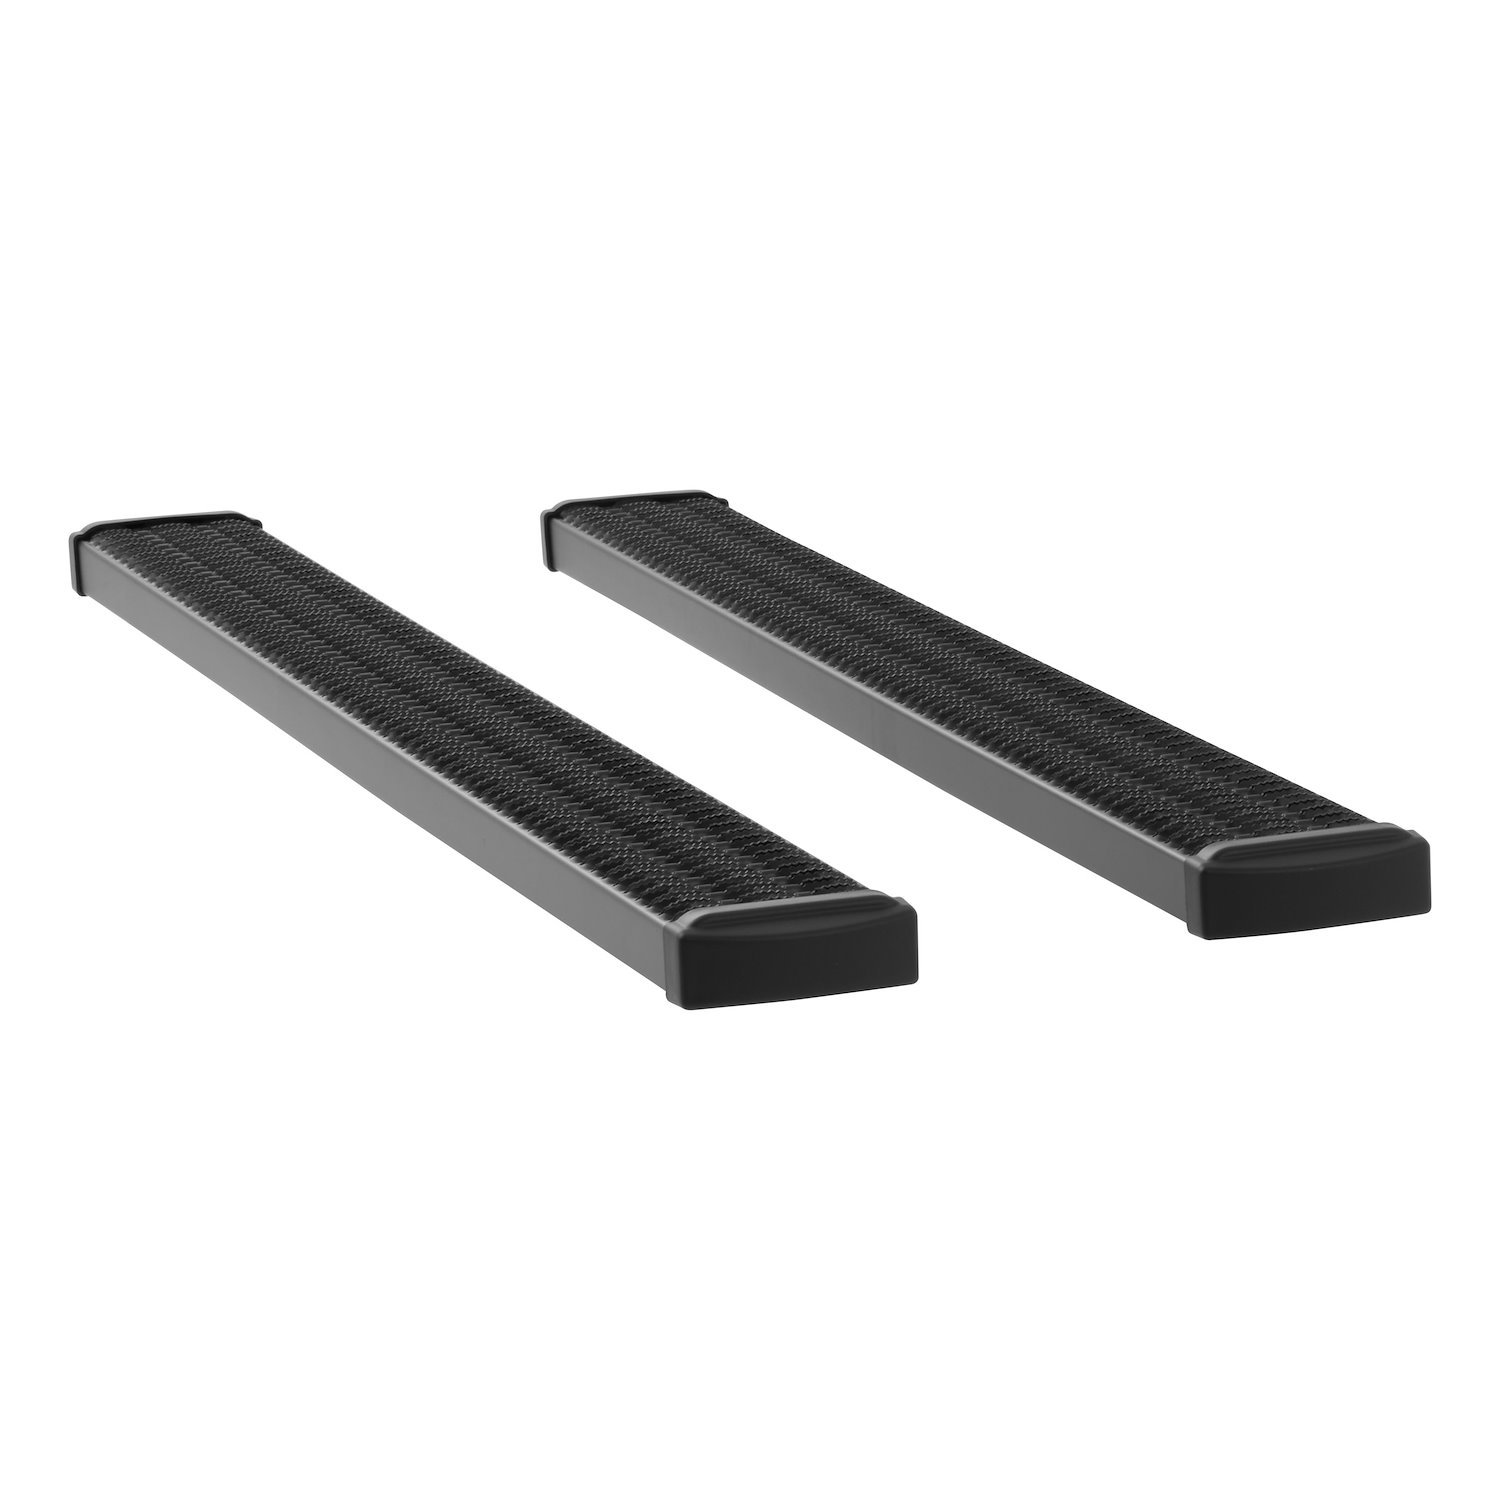 415078-401632 Grip Step 7 in. x 78 in. Black Aluminum Running Boards Fits Select Dodge, Ram 1500